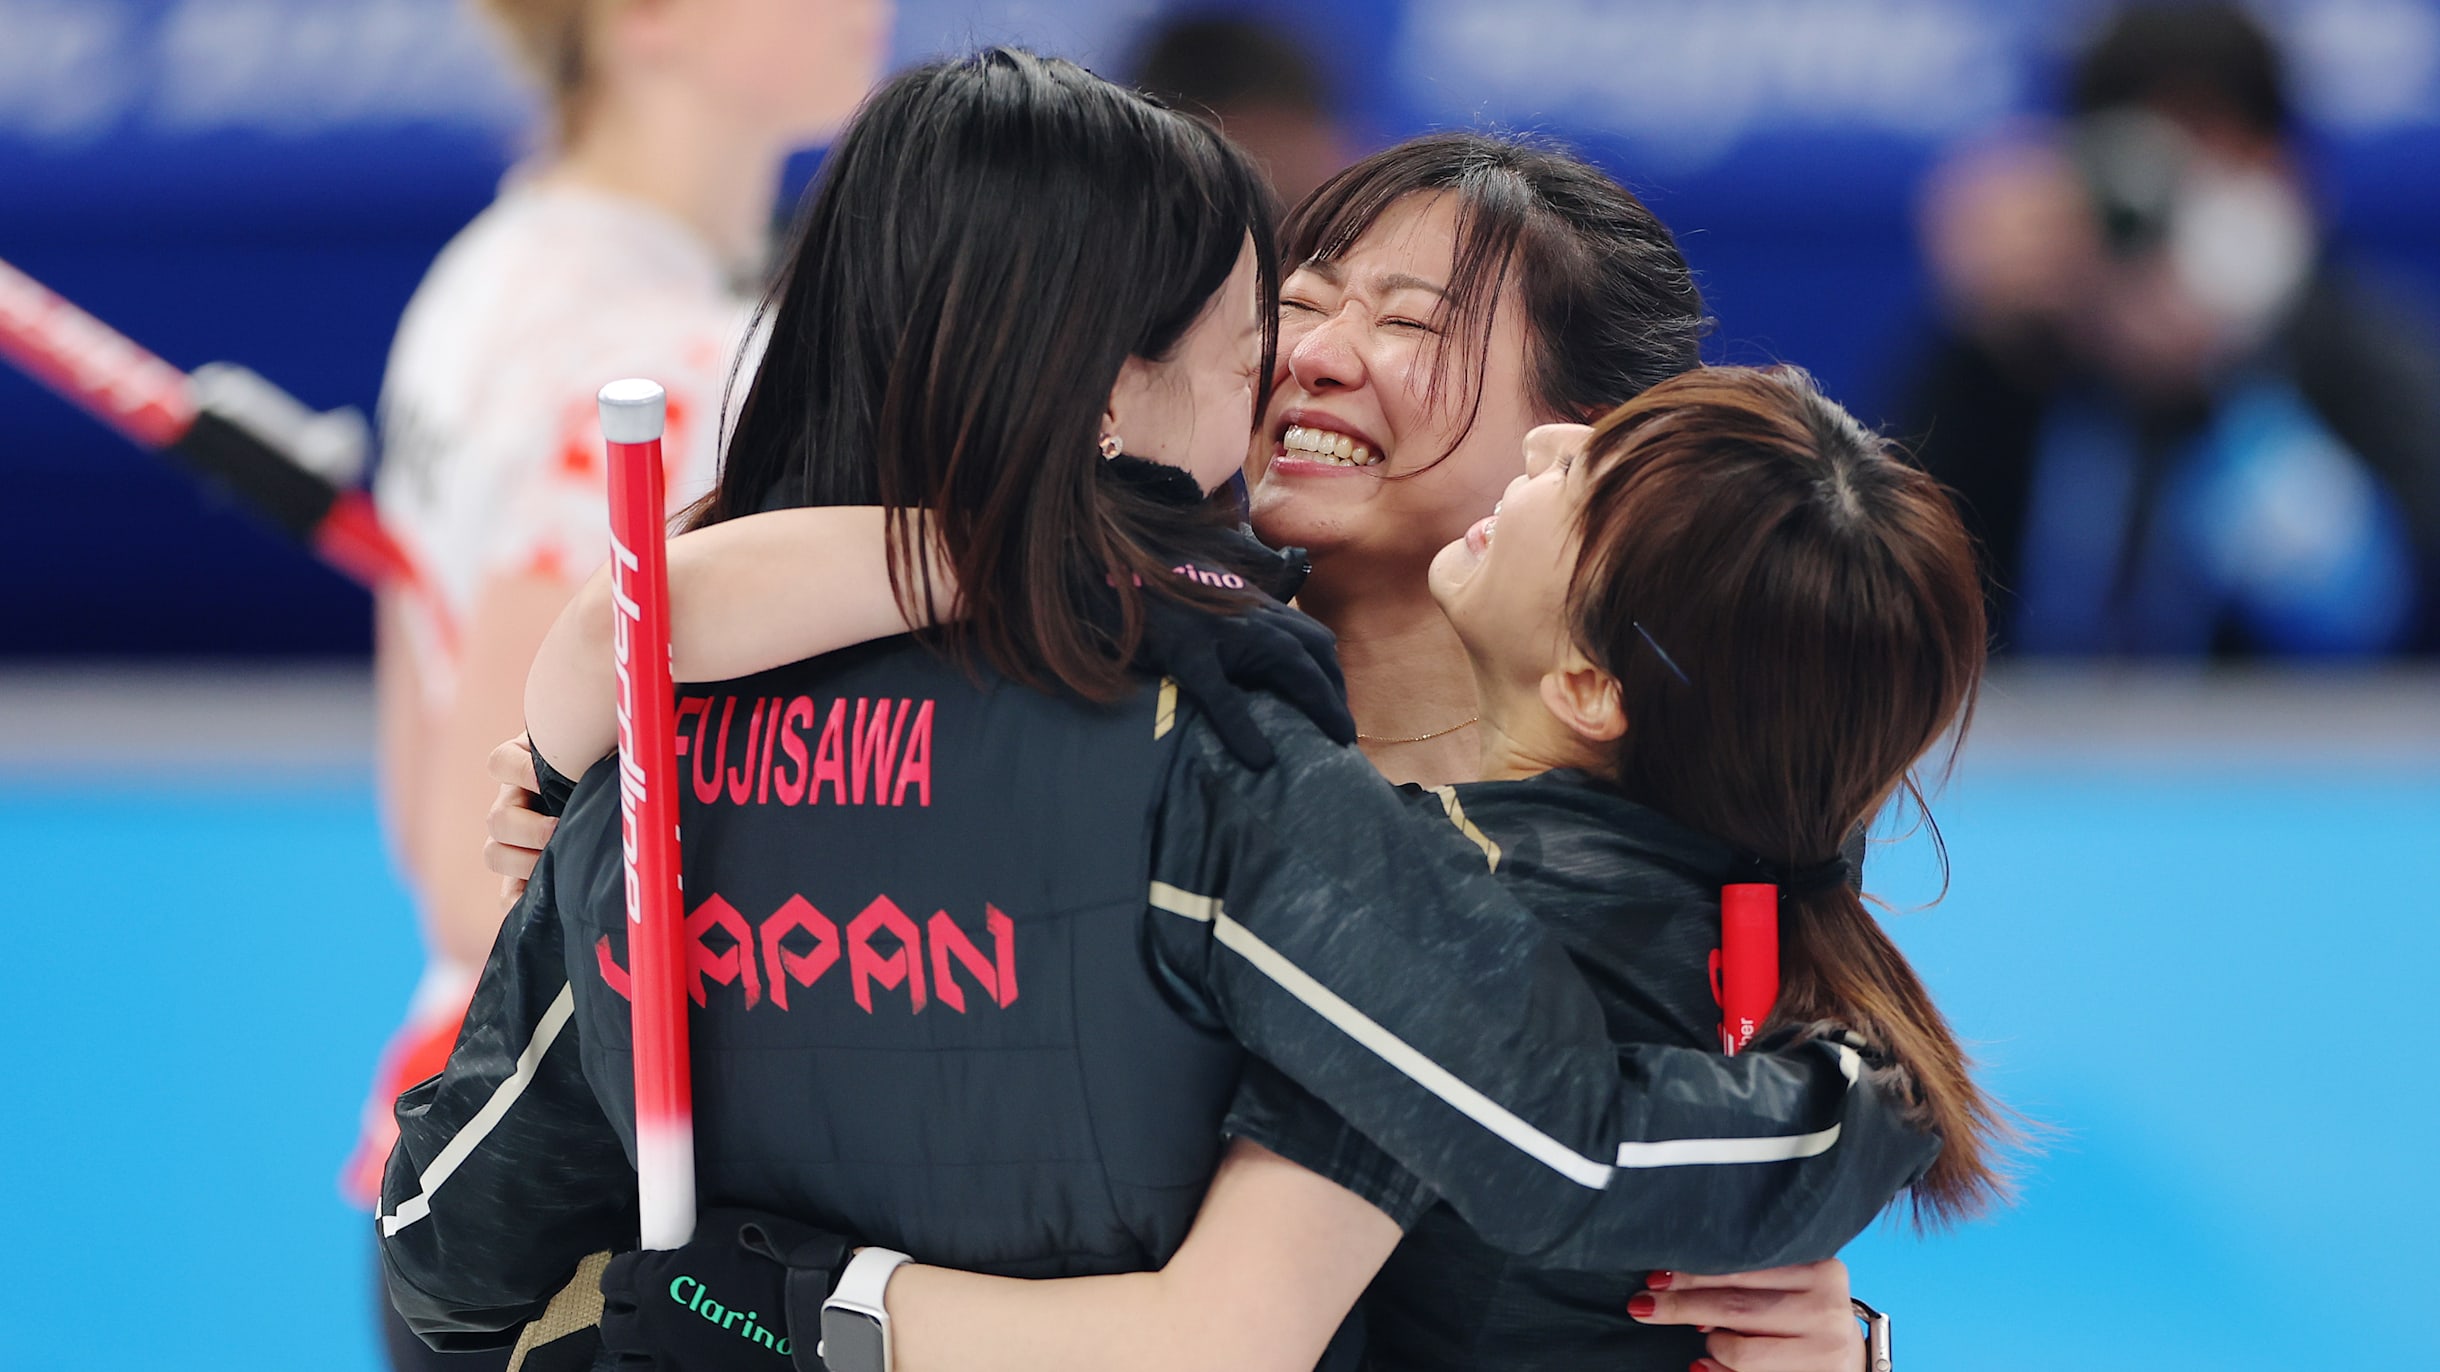 Japan women's curling: Top things you need to know about Team Fujisawa